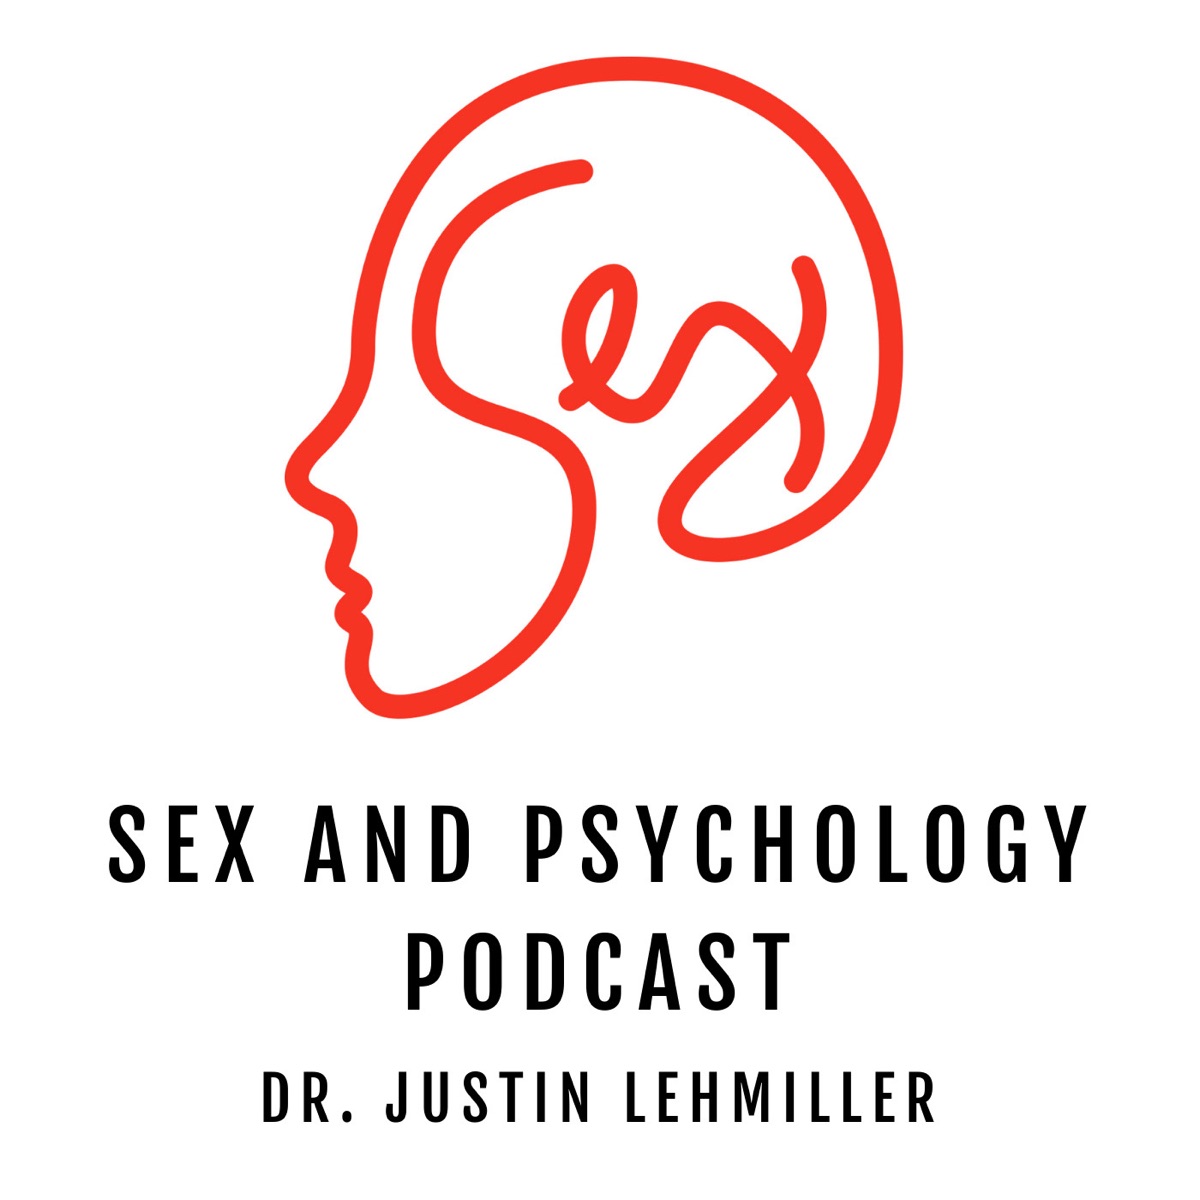 Sex and Psychology Podcast – Podcast picture